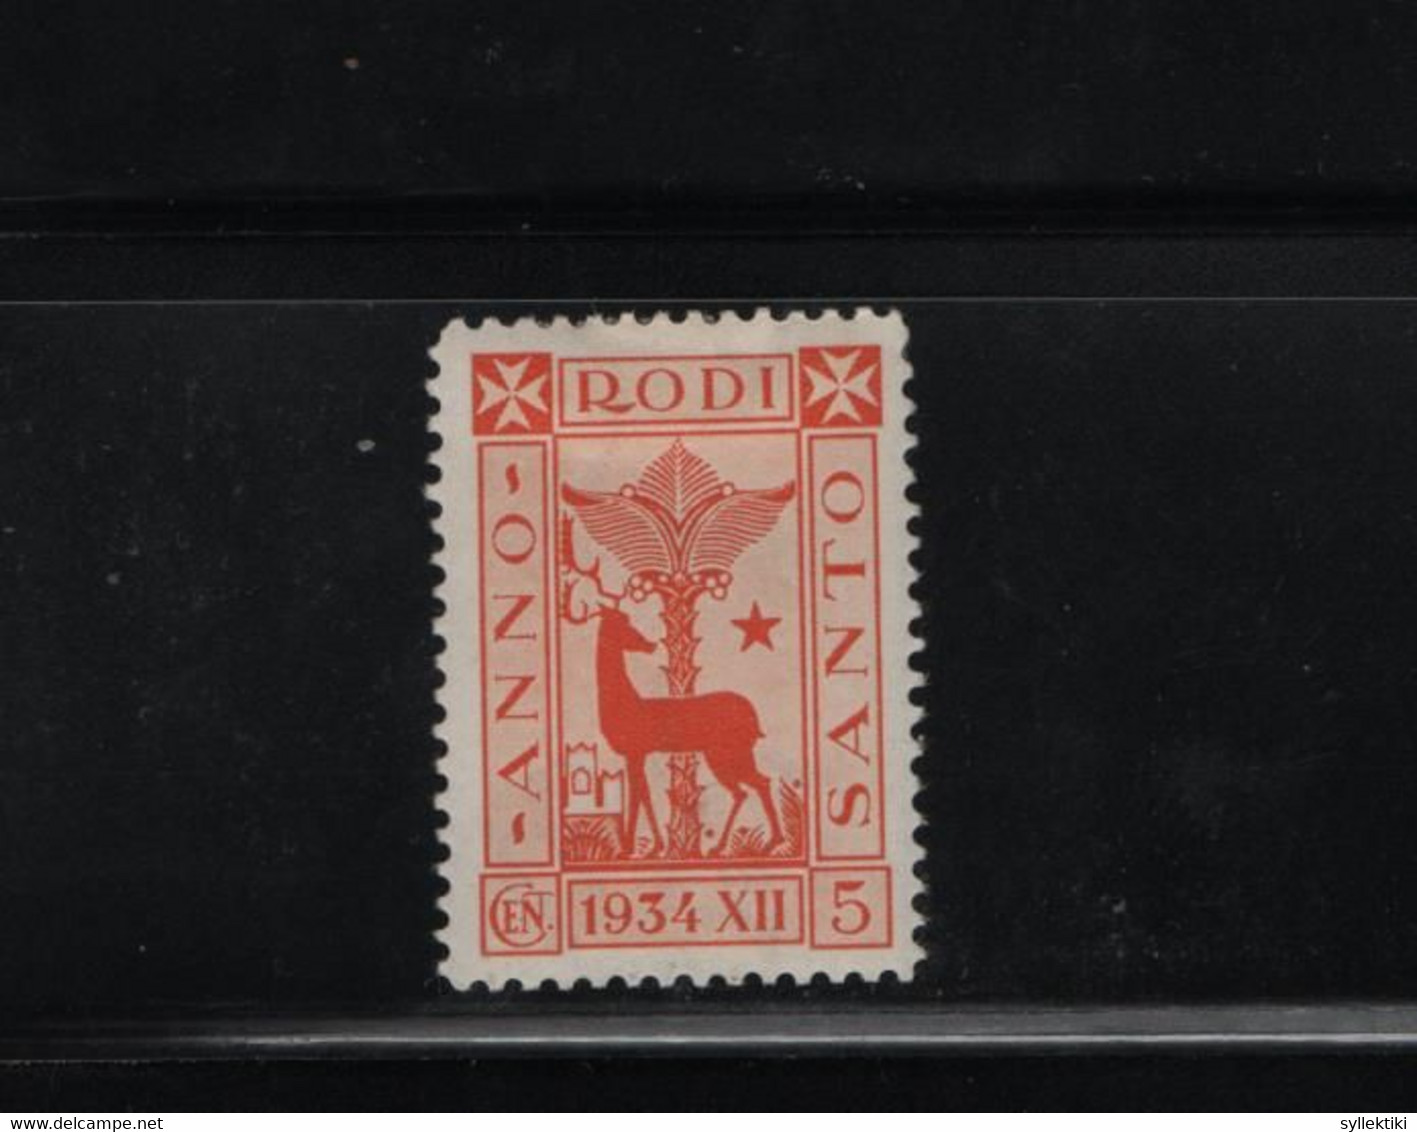 GREECE DODECANESE 1935 HOLY YEAR ISSUE 5 CENT MH STAMP    HELLAS No 144 AND VALUE EURO 25.00 - Dodekanisos